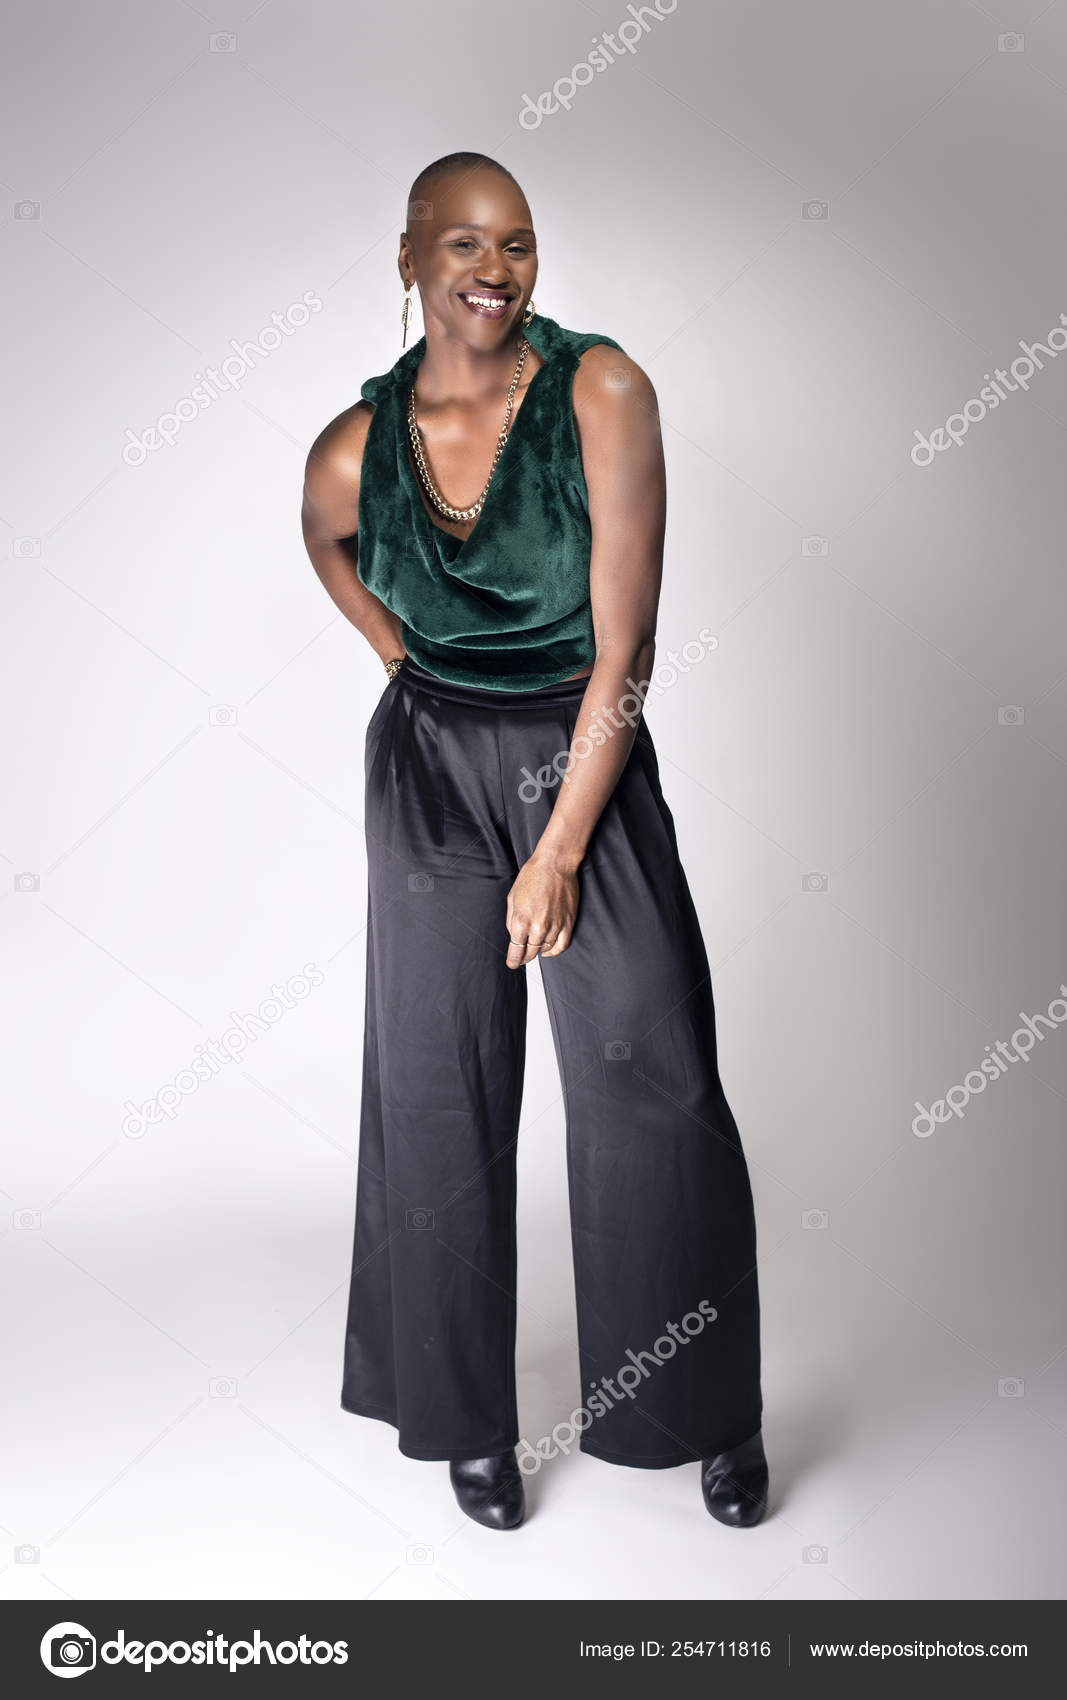 Sexy Black Female Fashion Model Wearing Apparel With Blue Pants